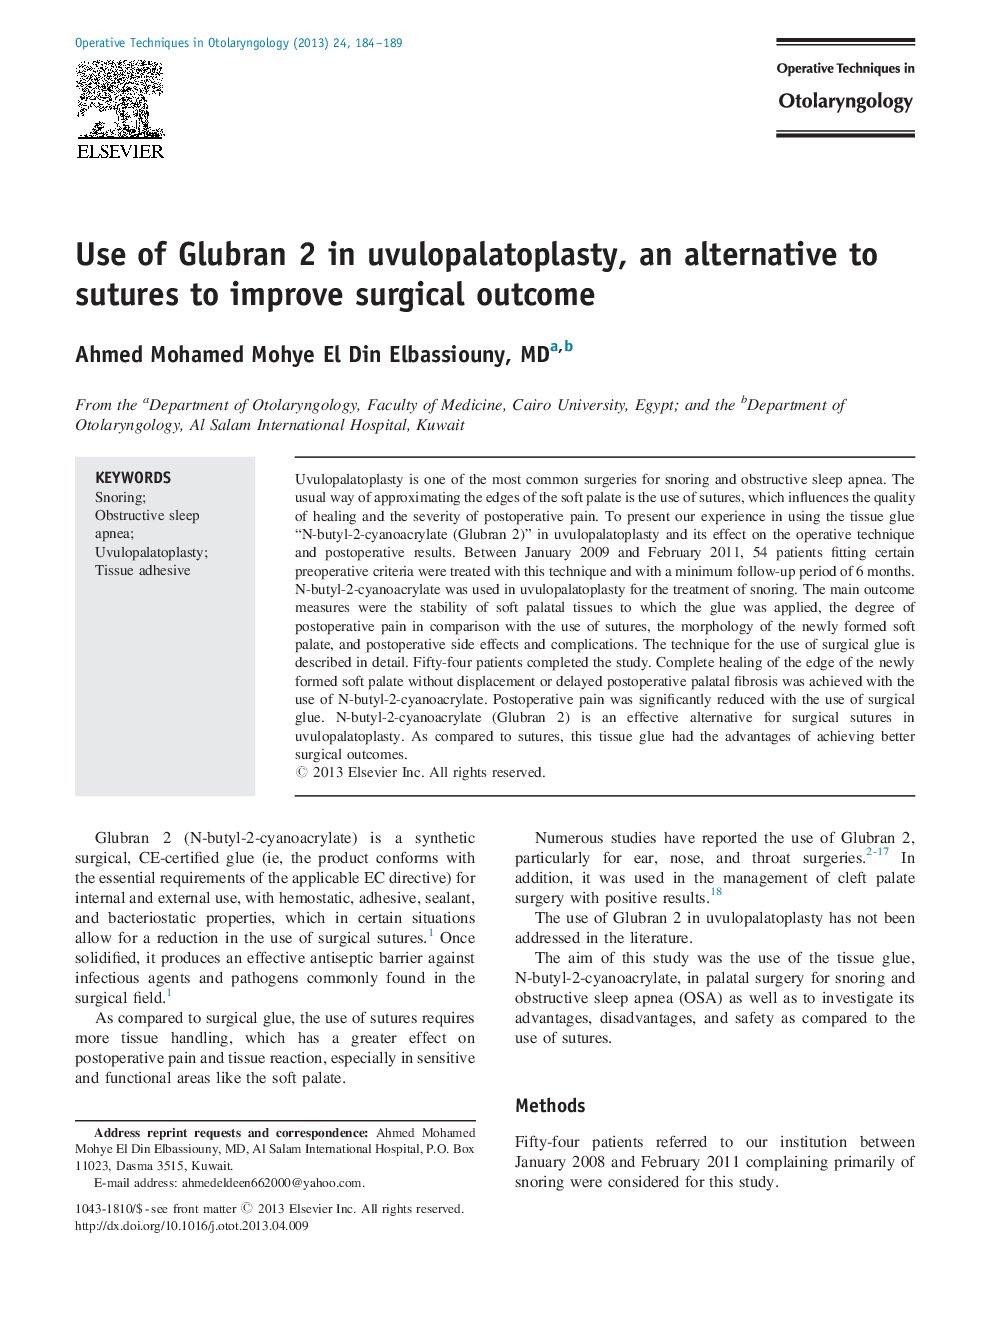 Use of Glubran 2 in uvulopalatoplasty, an alternative to sutures to improve surgical outcome